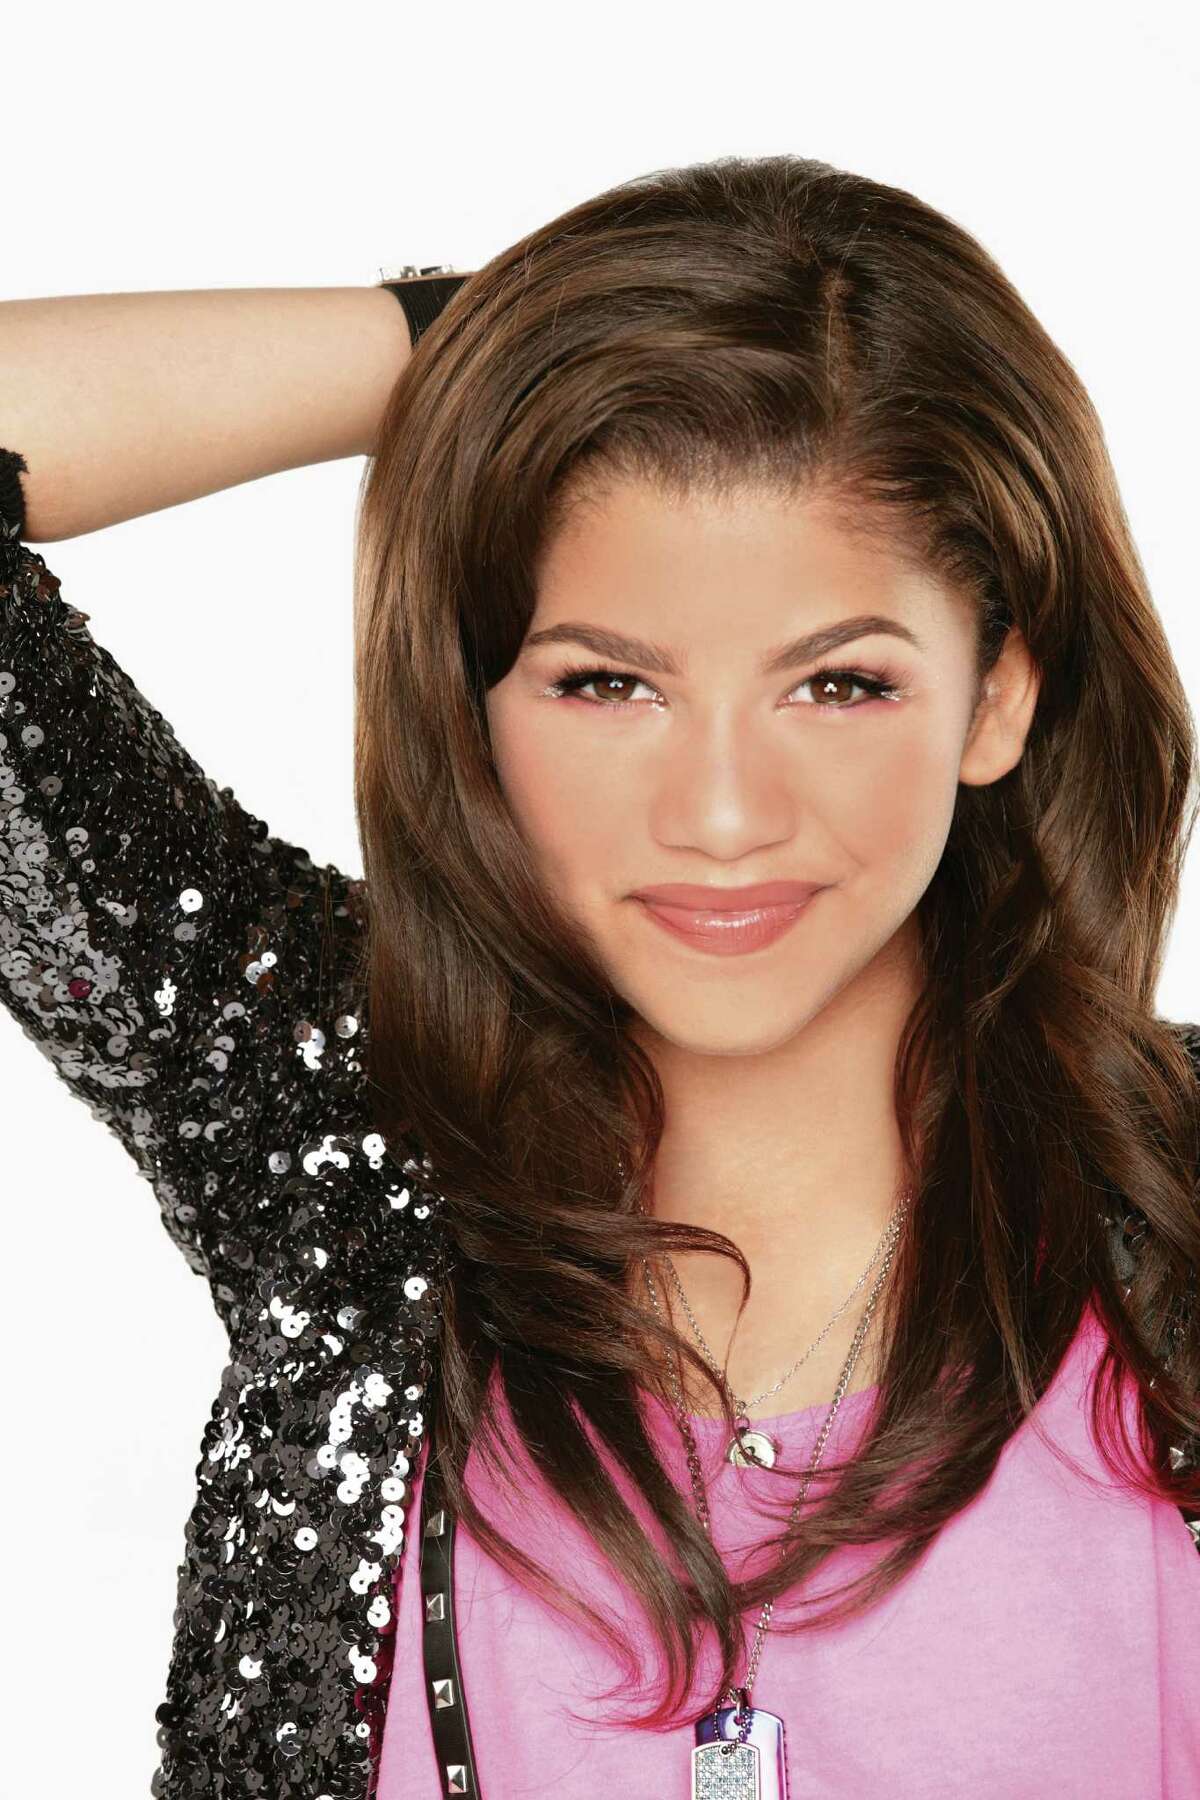 Zendaya rose to fame as the star of the Disney Channel series "Shake It Up."